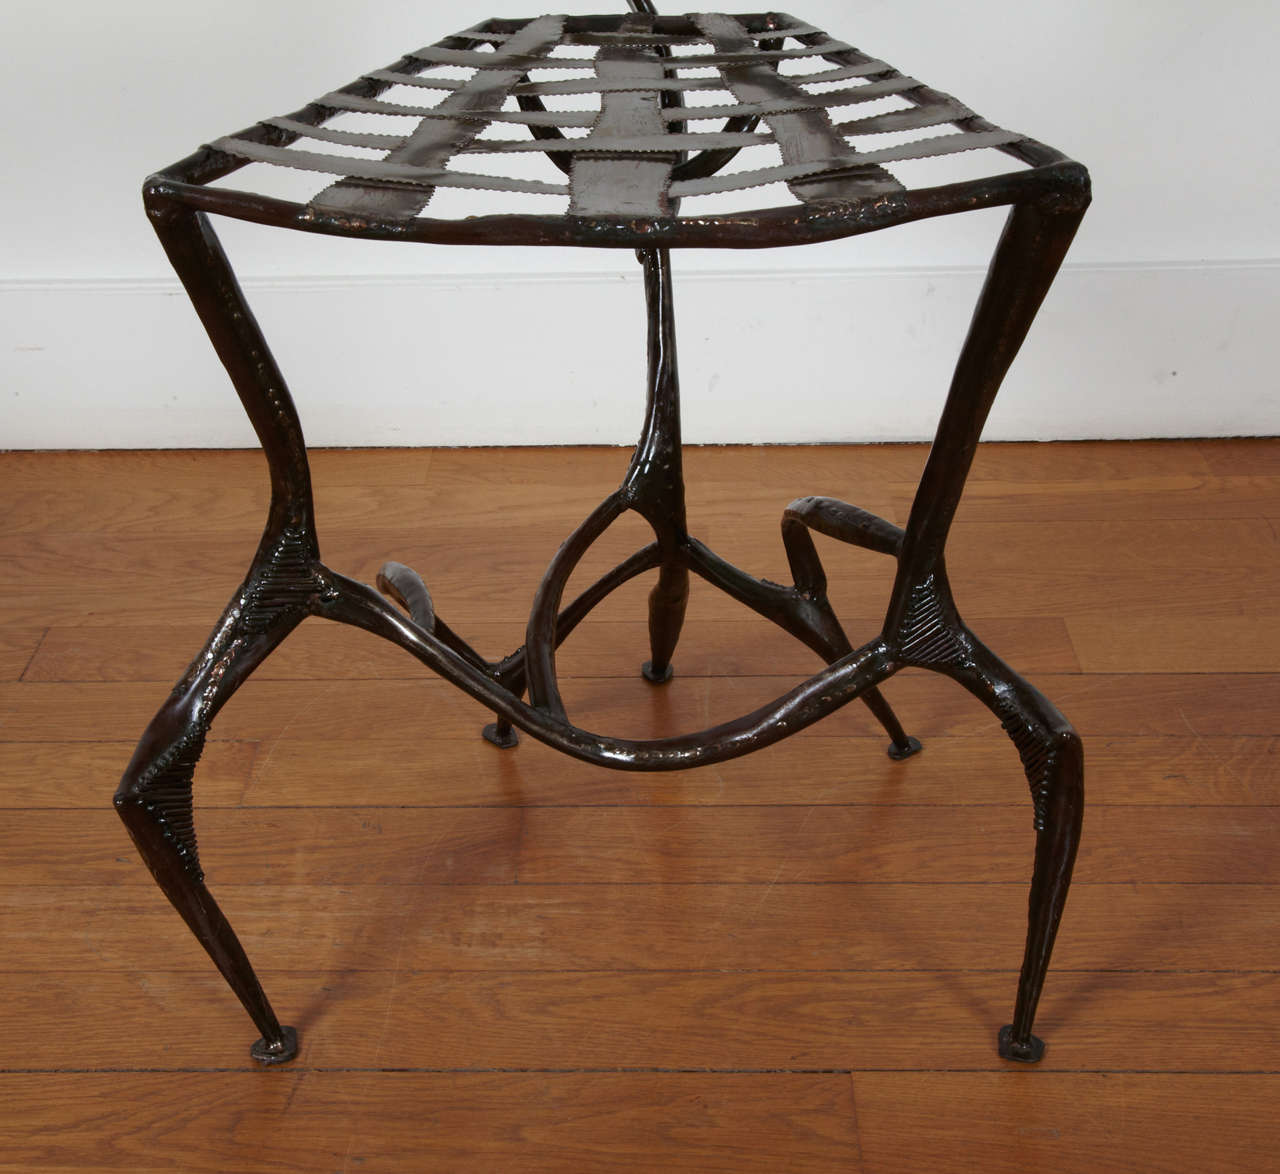 Two Steel Copperware Chairs, 2008 / 2013 by Manuel Simon. 4